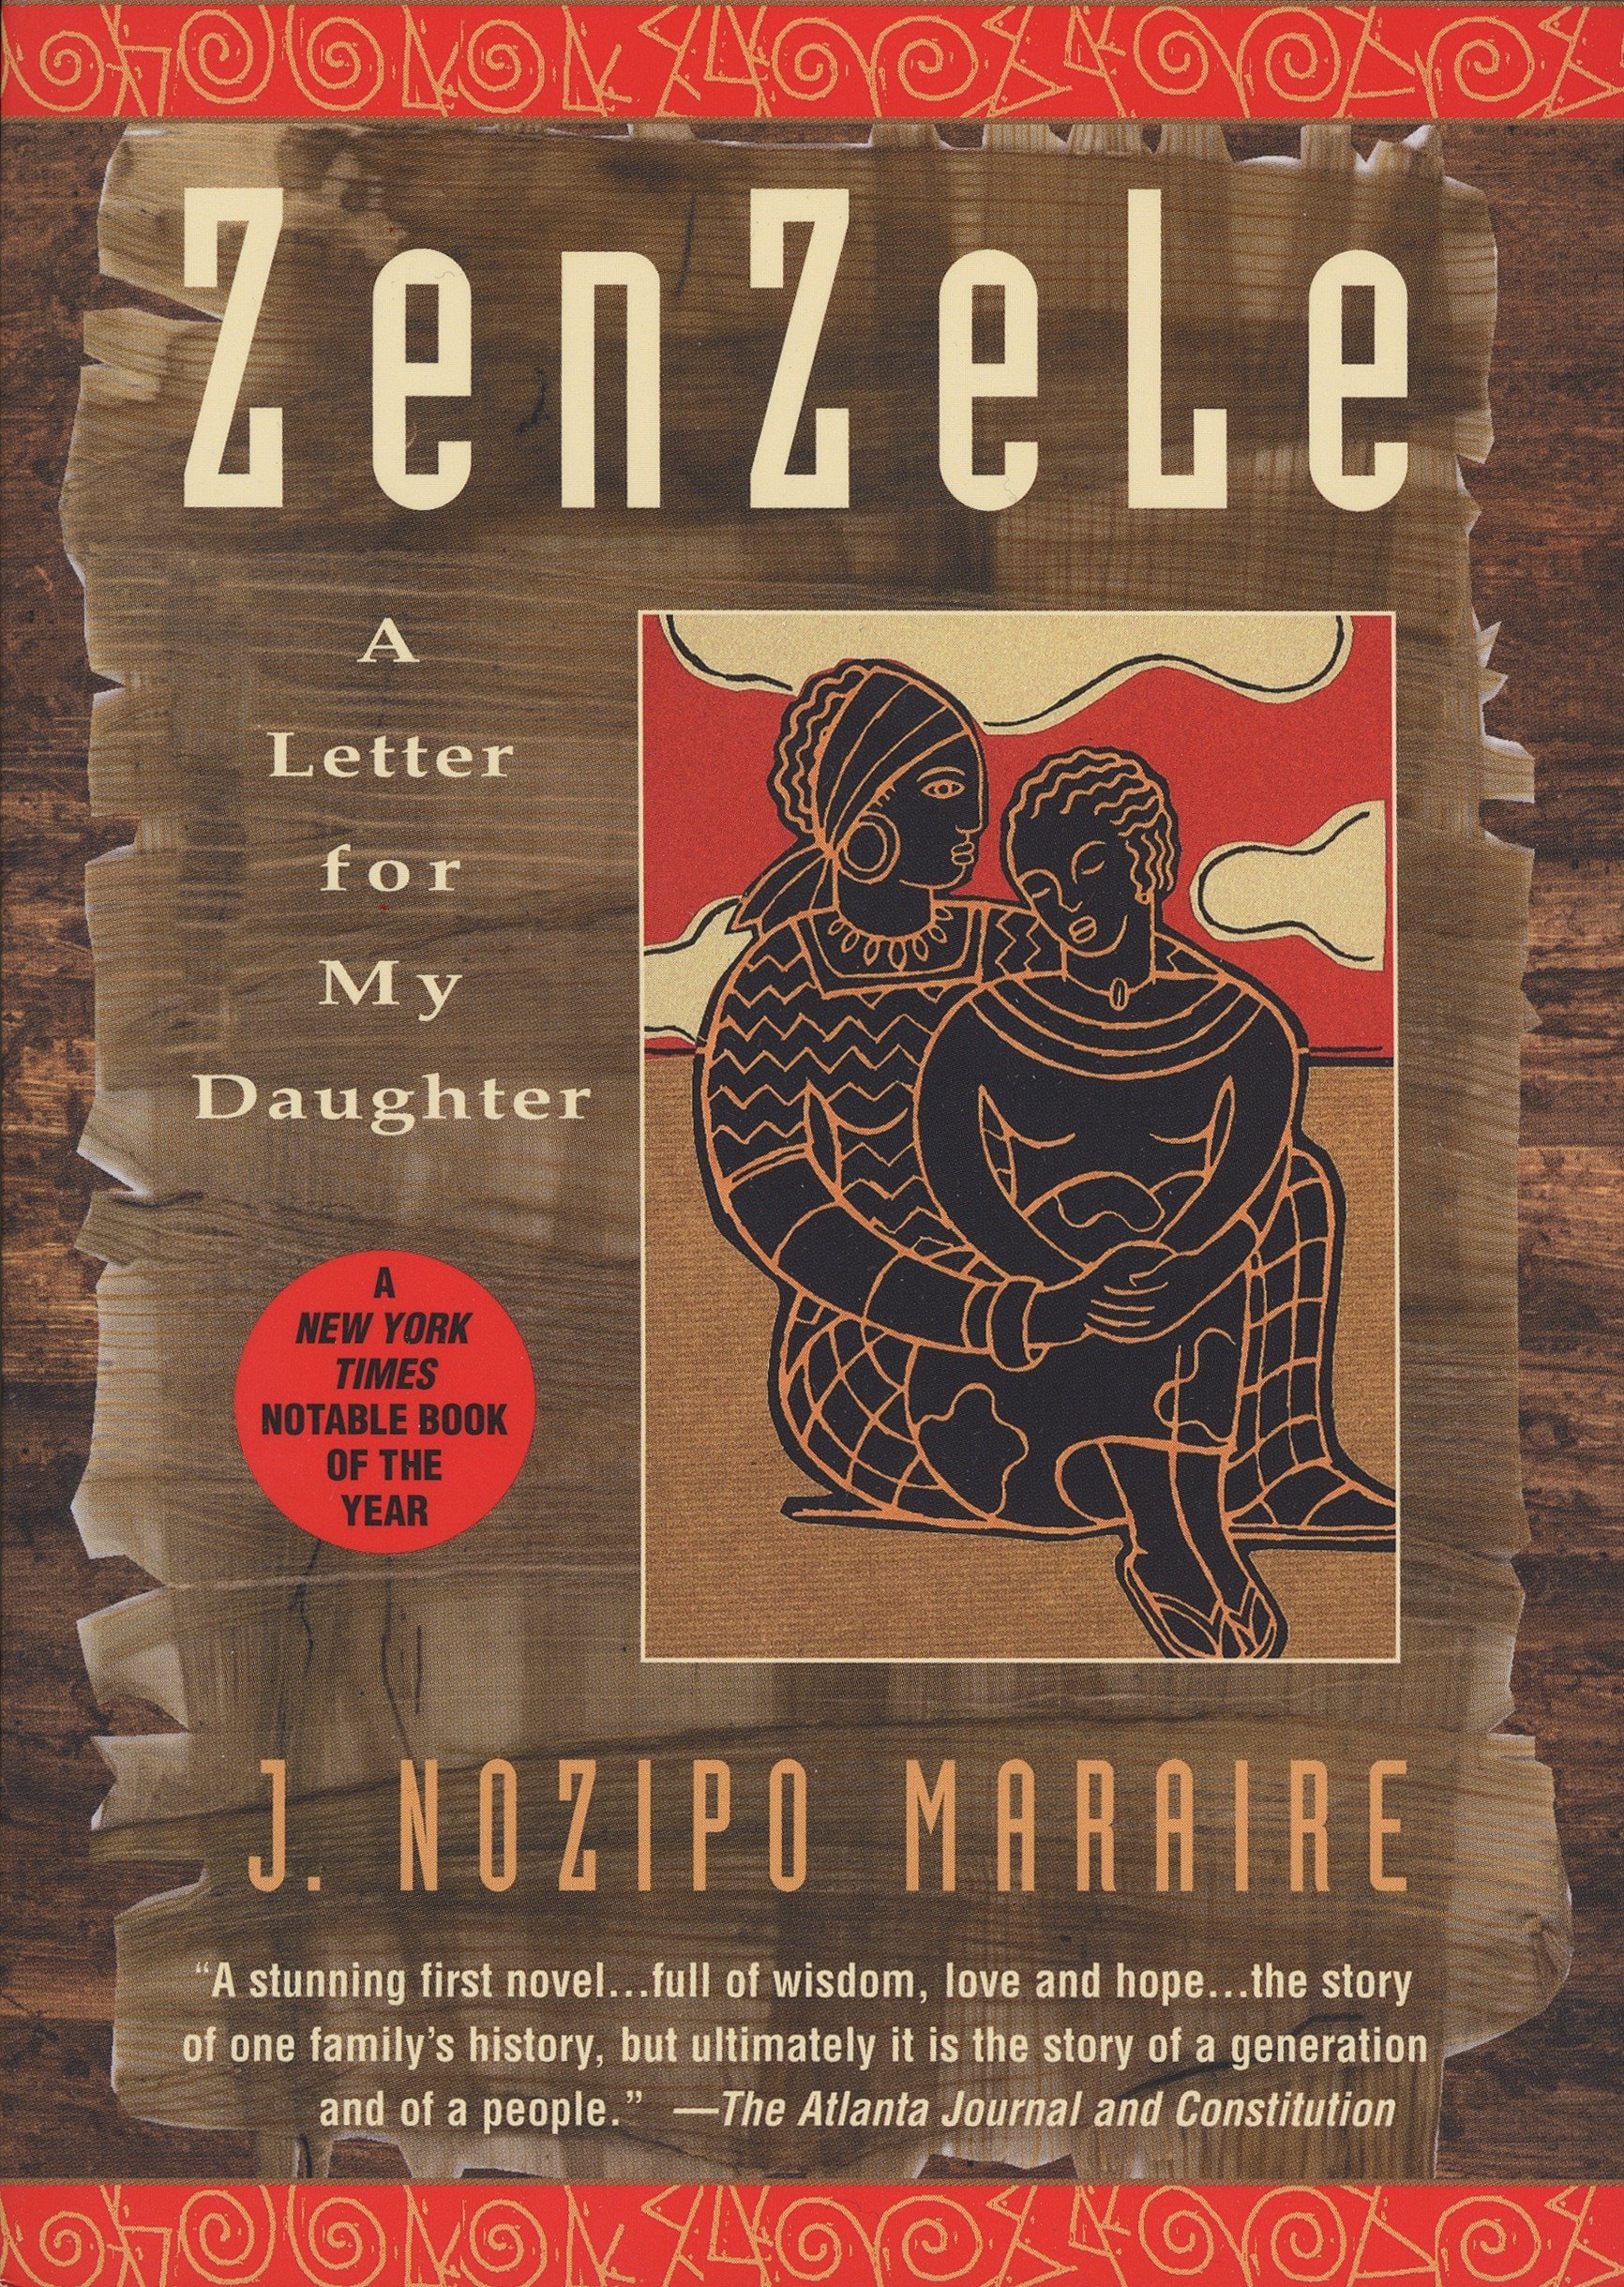 ZenZele: A Letter for My Daughter